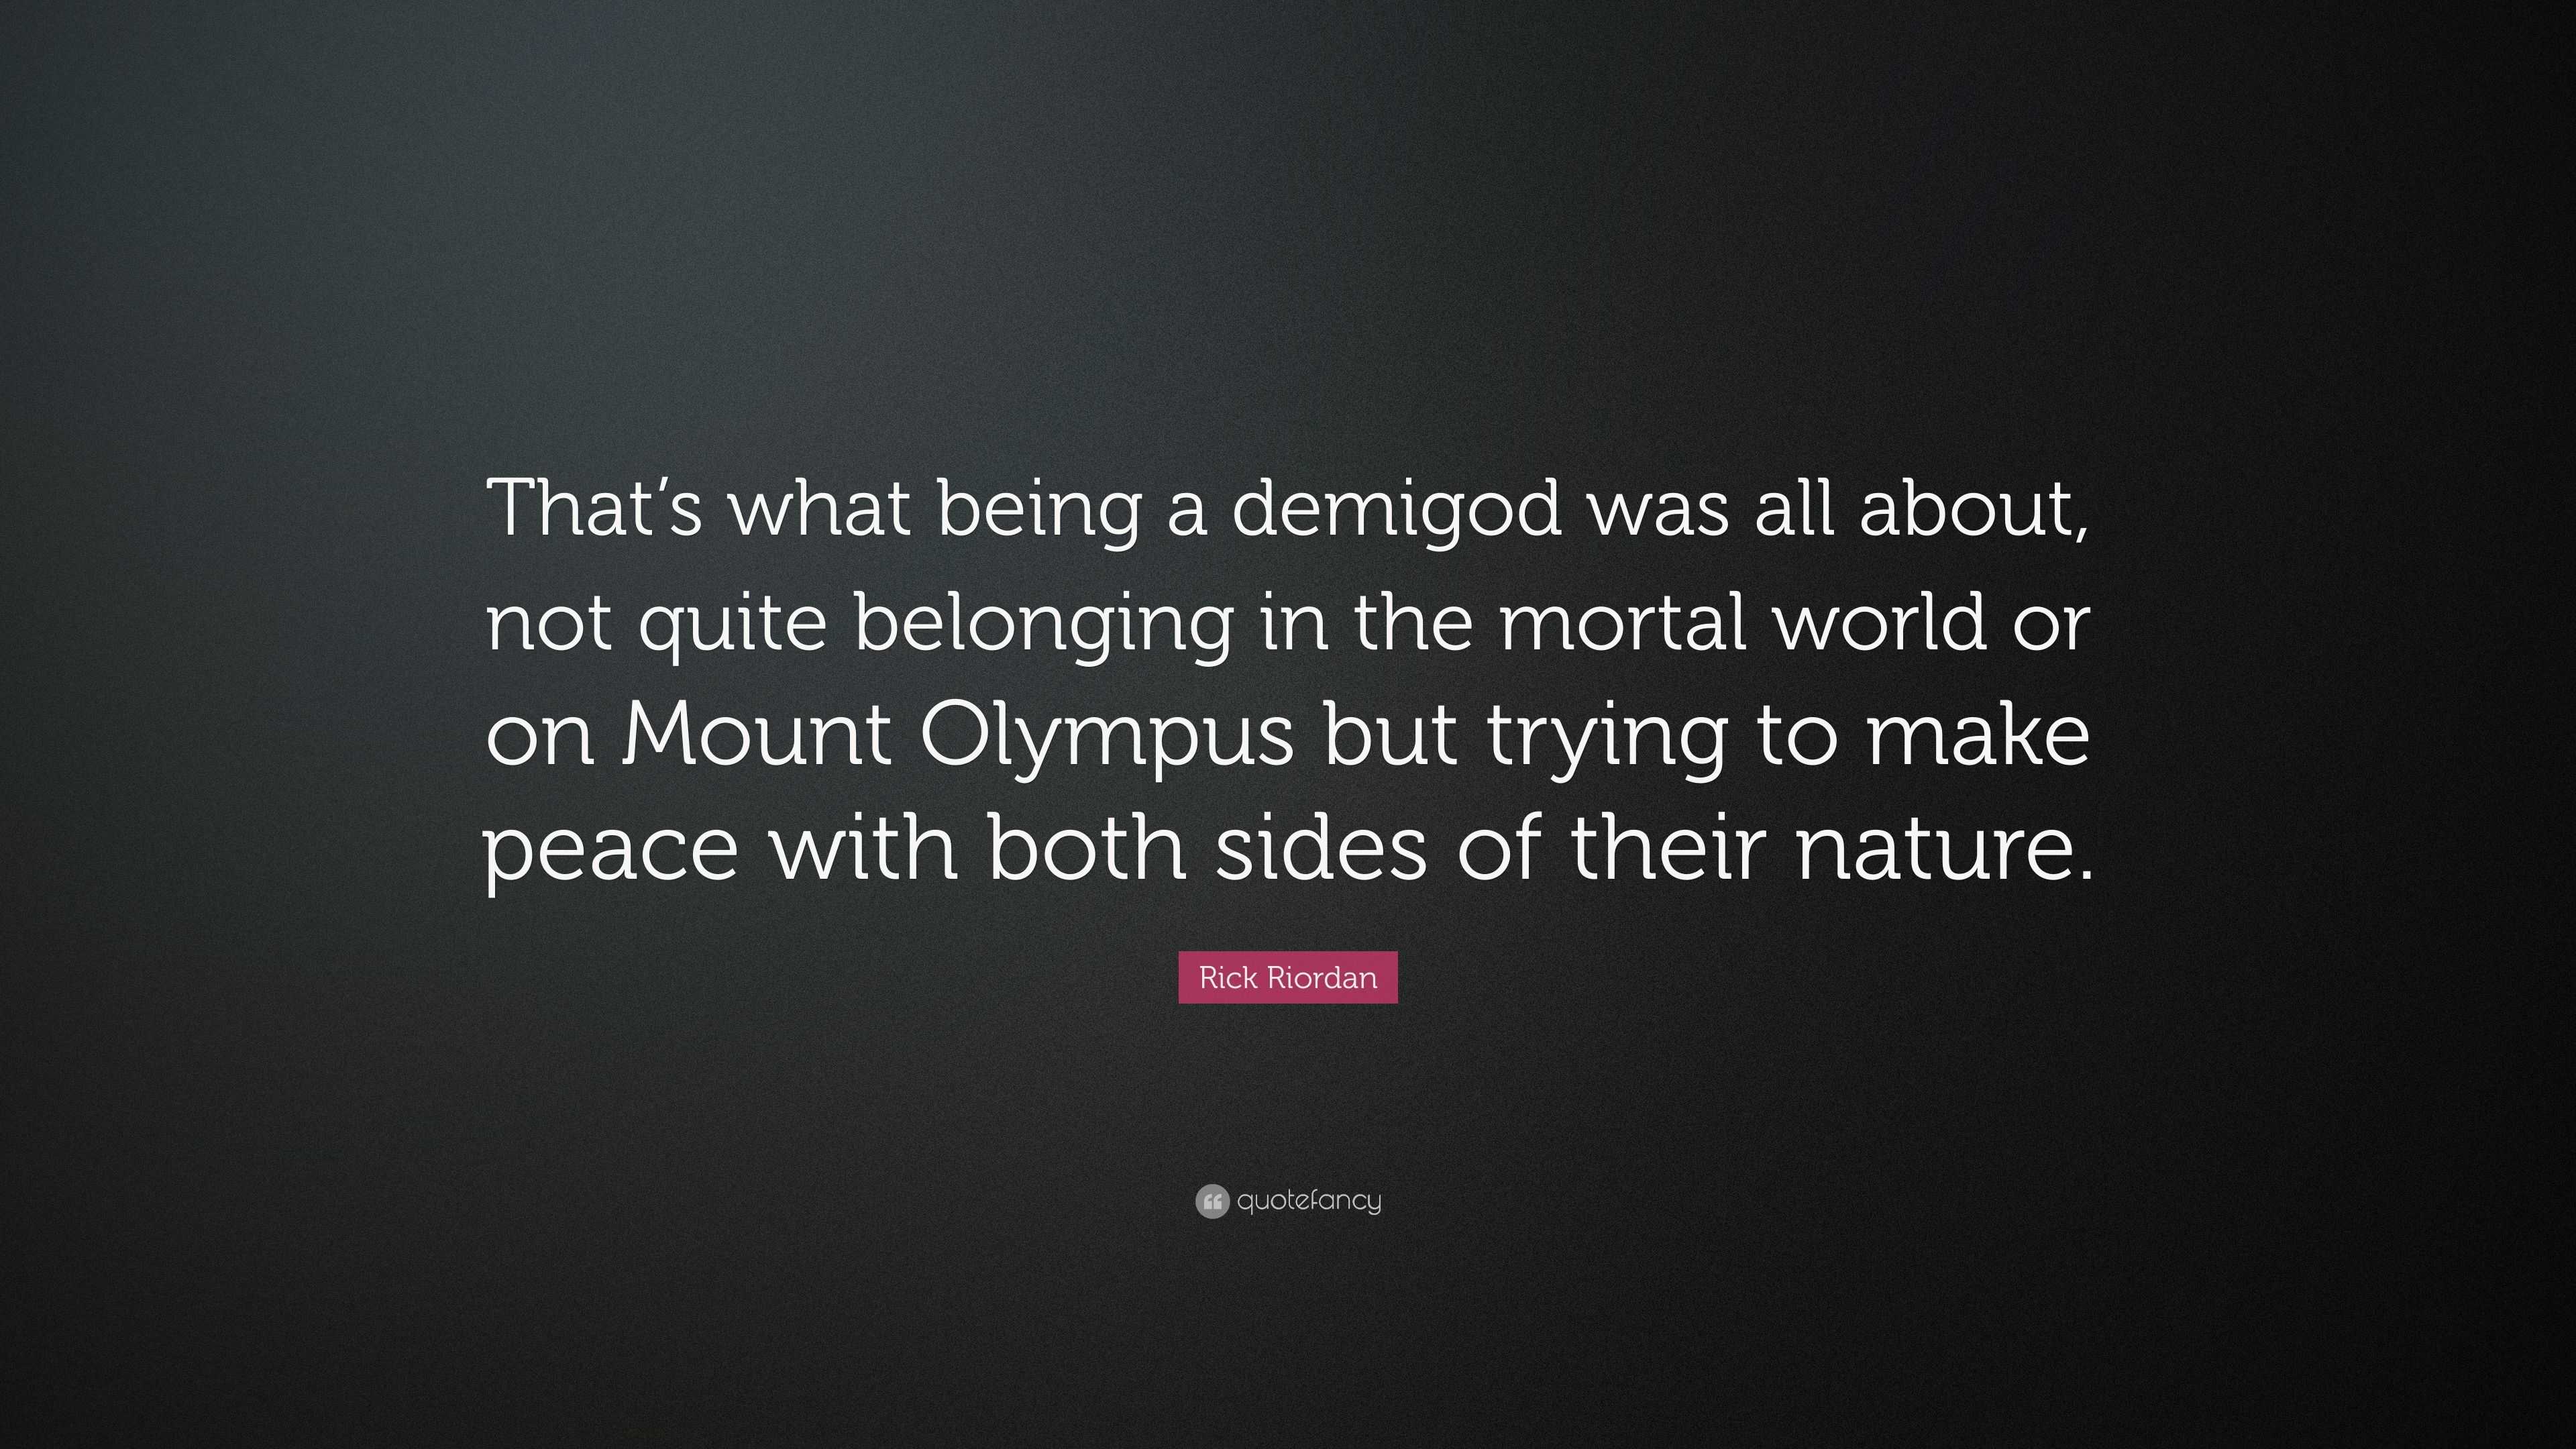 famous quotes from rick riordan on demigods and magicians